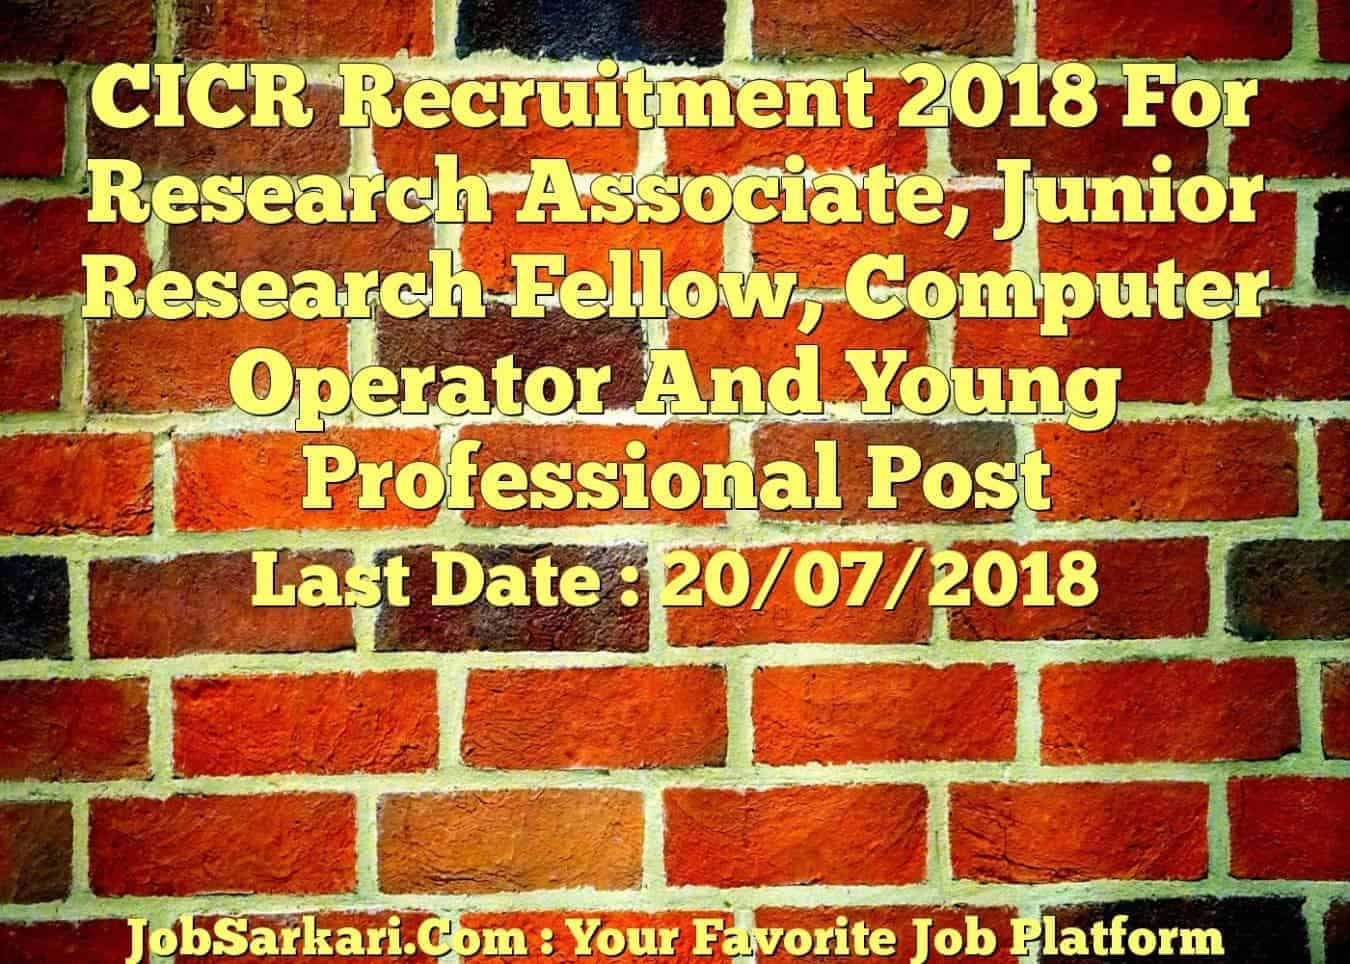 CICR Recruitment 2018 For Research Associate, Junior Research Fellow, Computer Operator And Young Professional Post